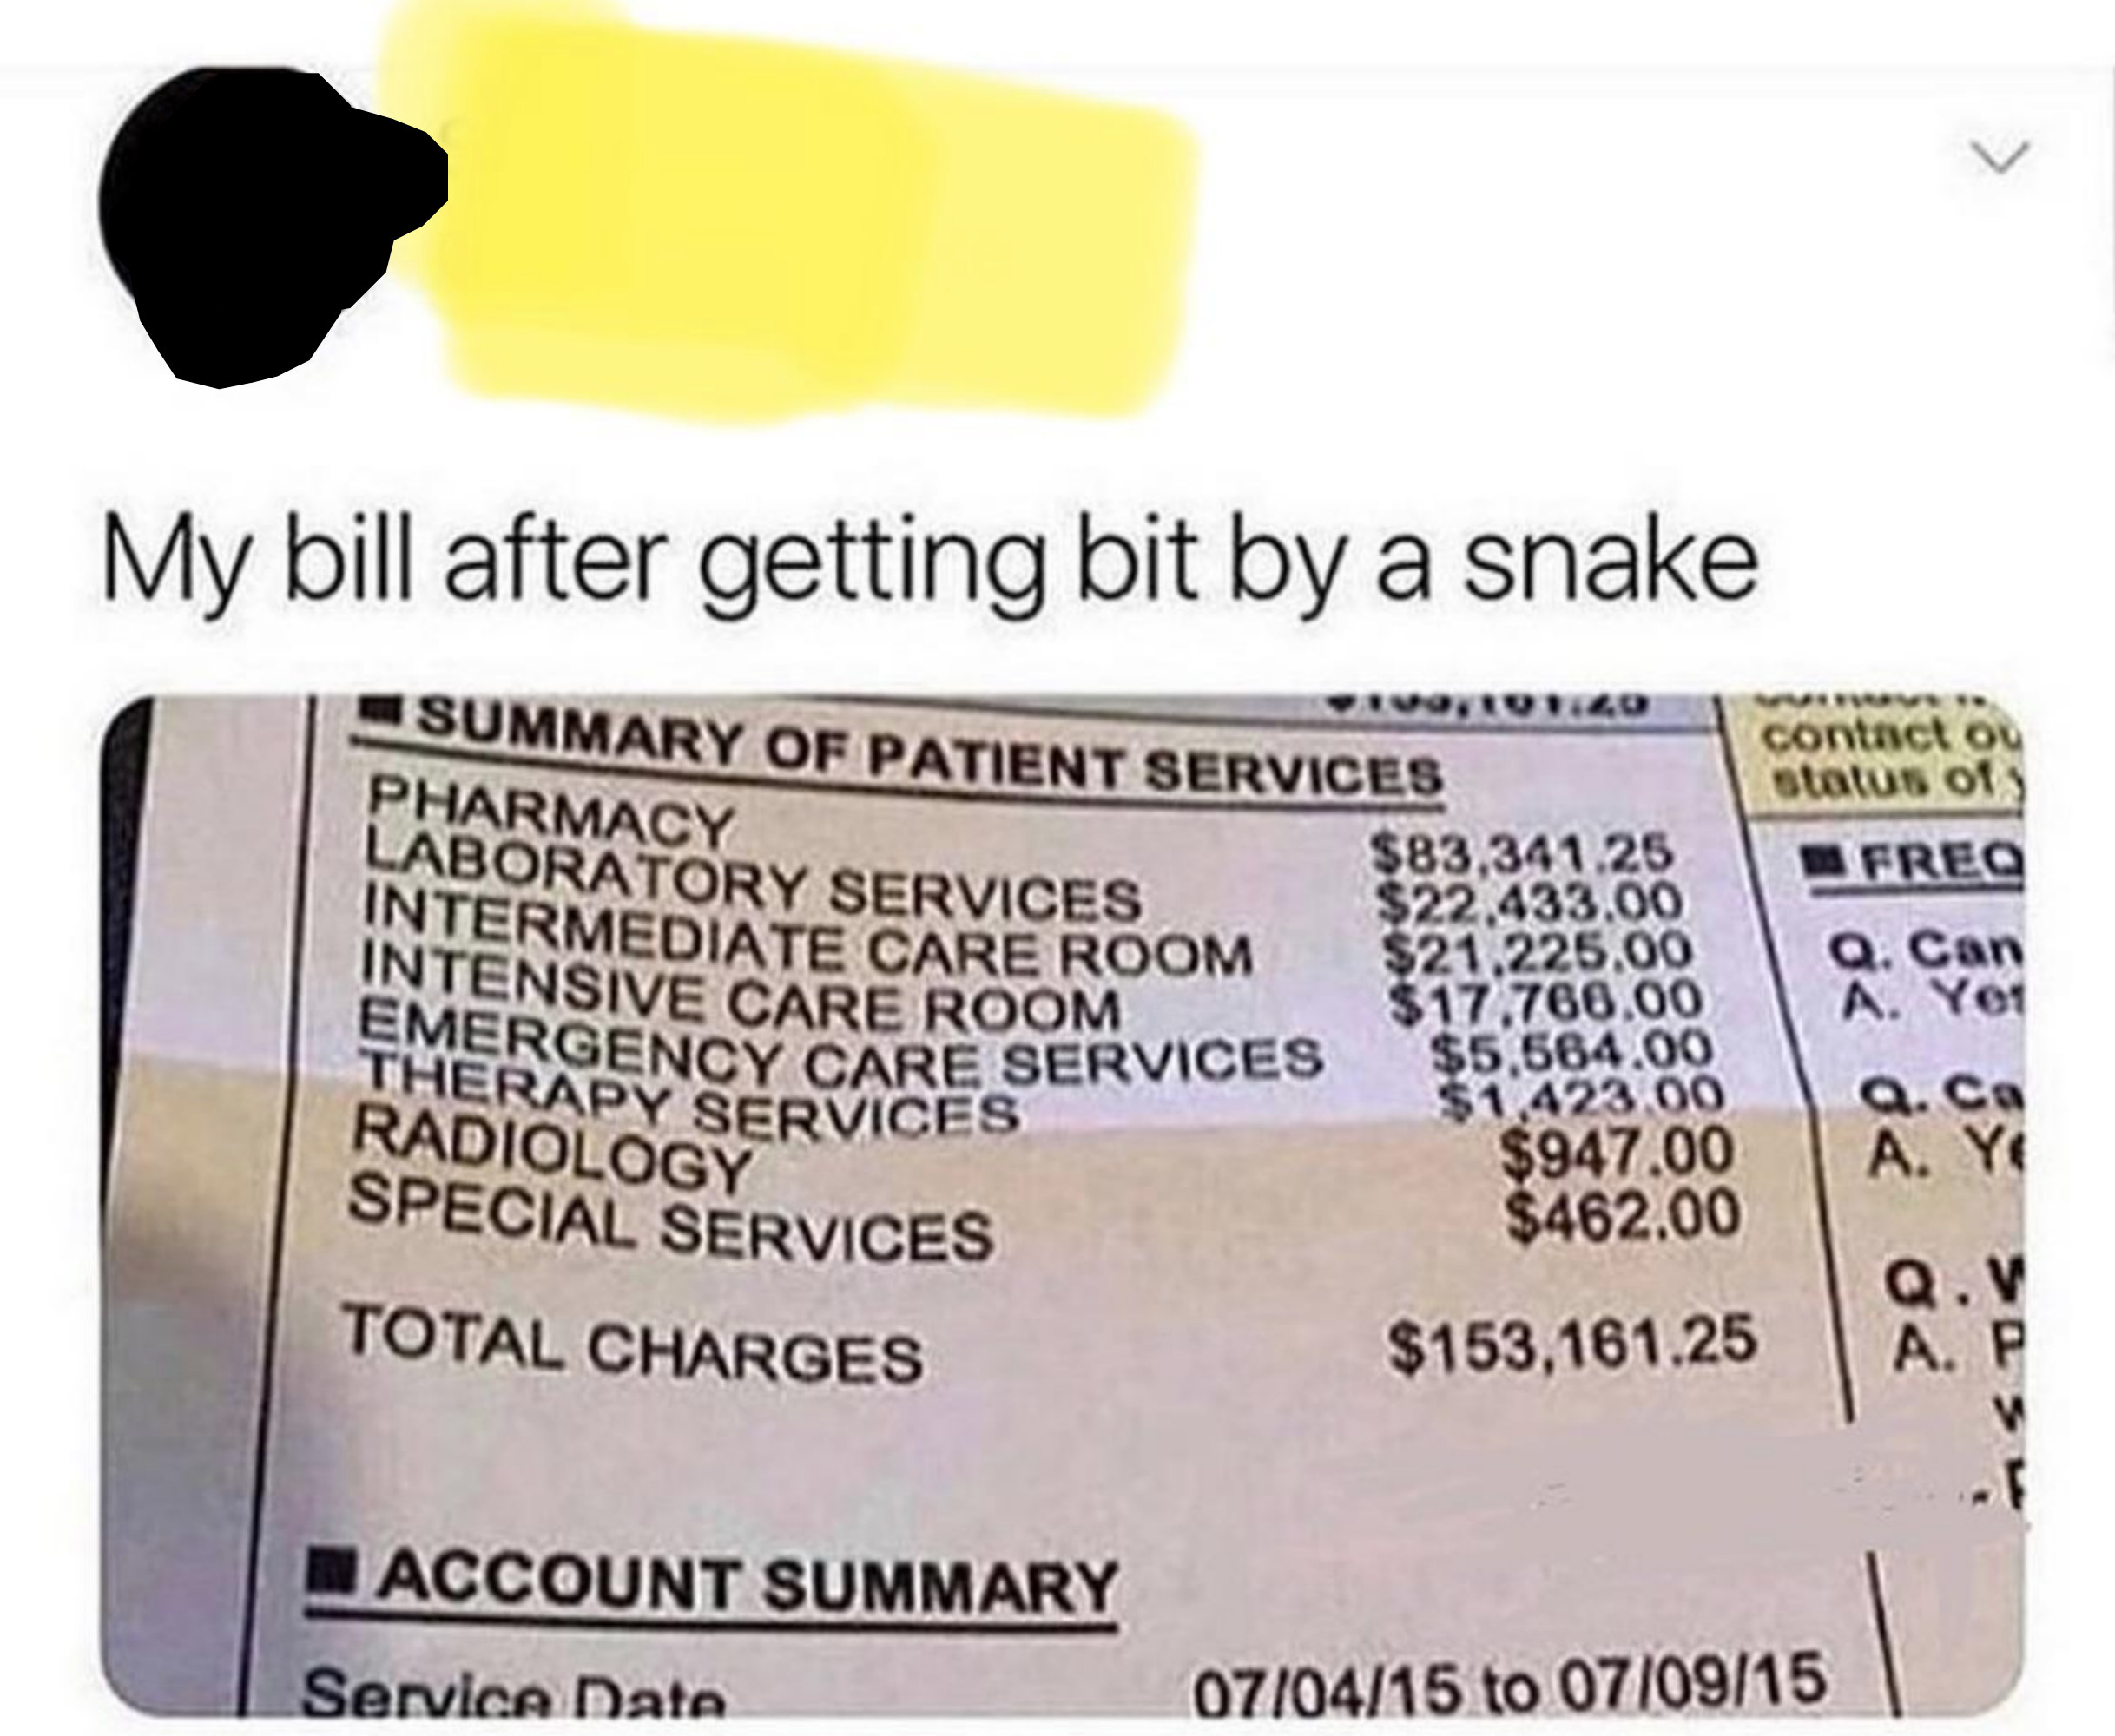 Tweet: &quot;My bill after getting bit by a snake&quot; with a bill for $153,161